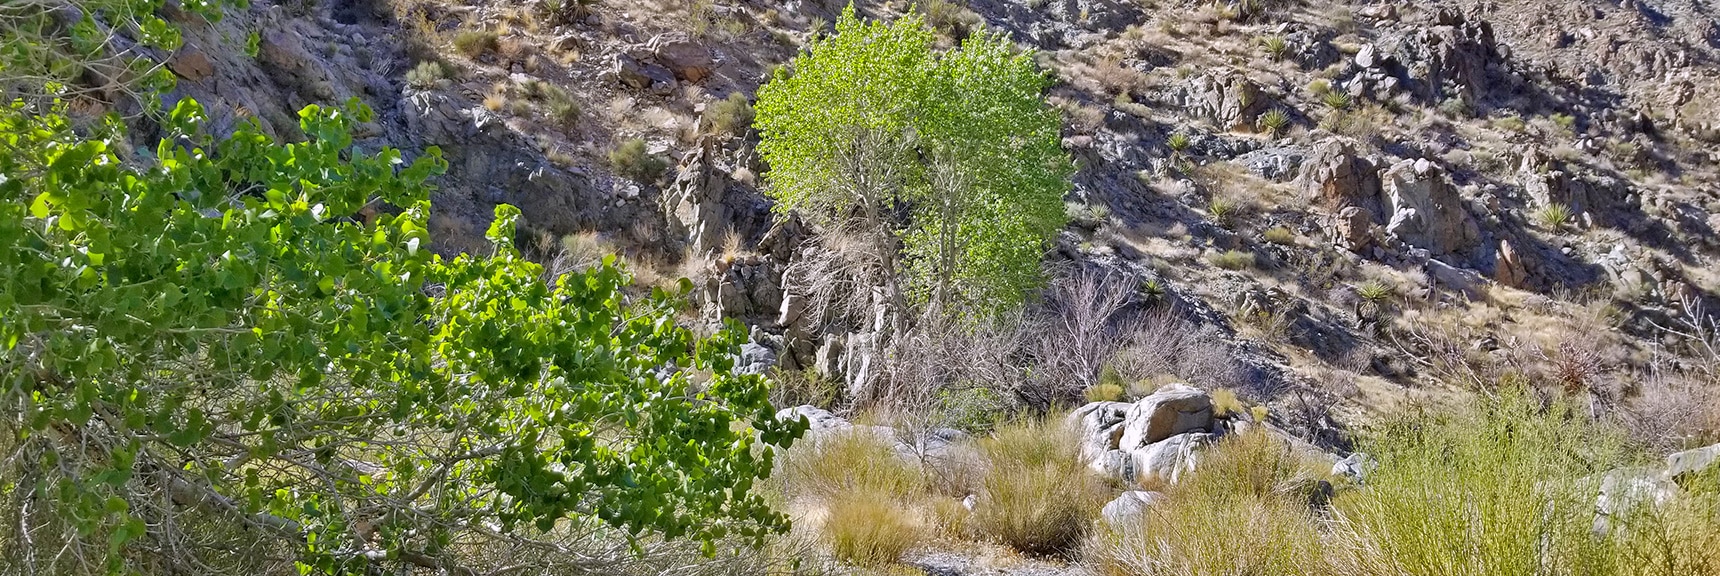 First Spring in Horse Thief Canyon | Horse Thief Canyon Loop | Mt. Wilson | Black Mountains | Lake Mead National Recreation Area, Arizona